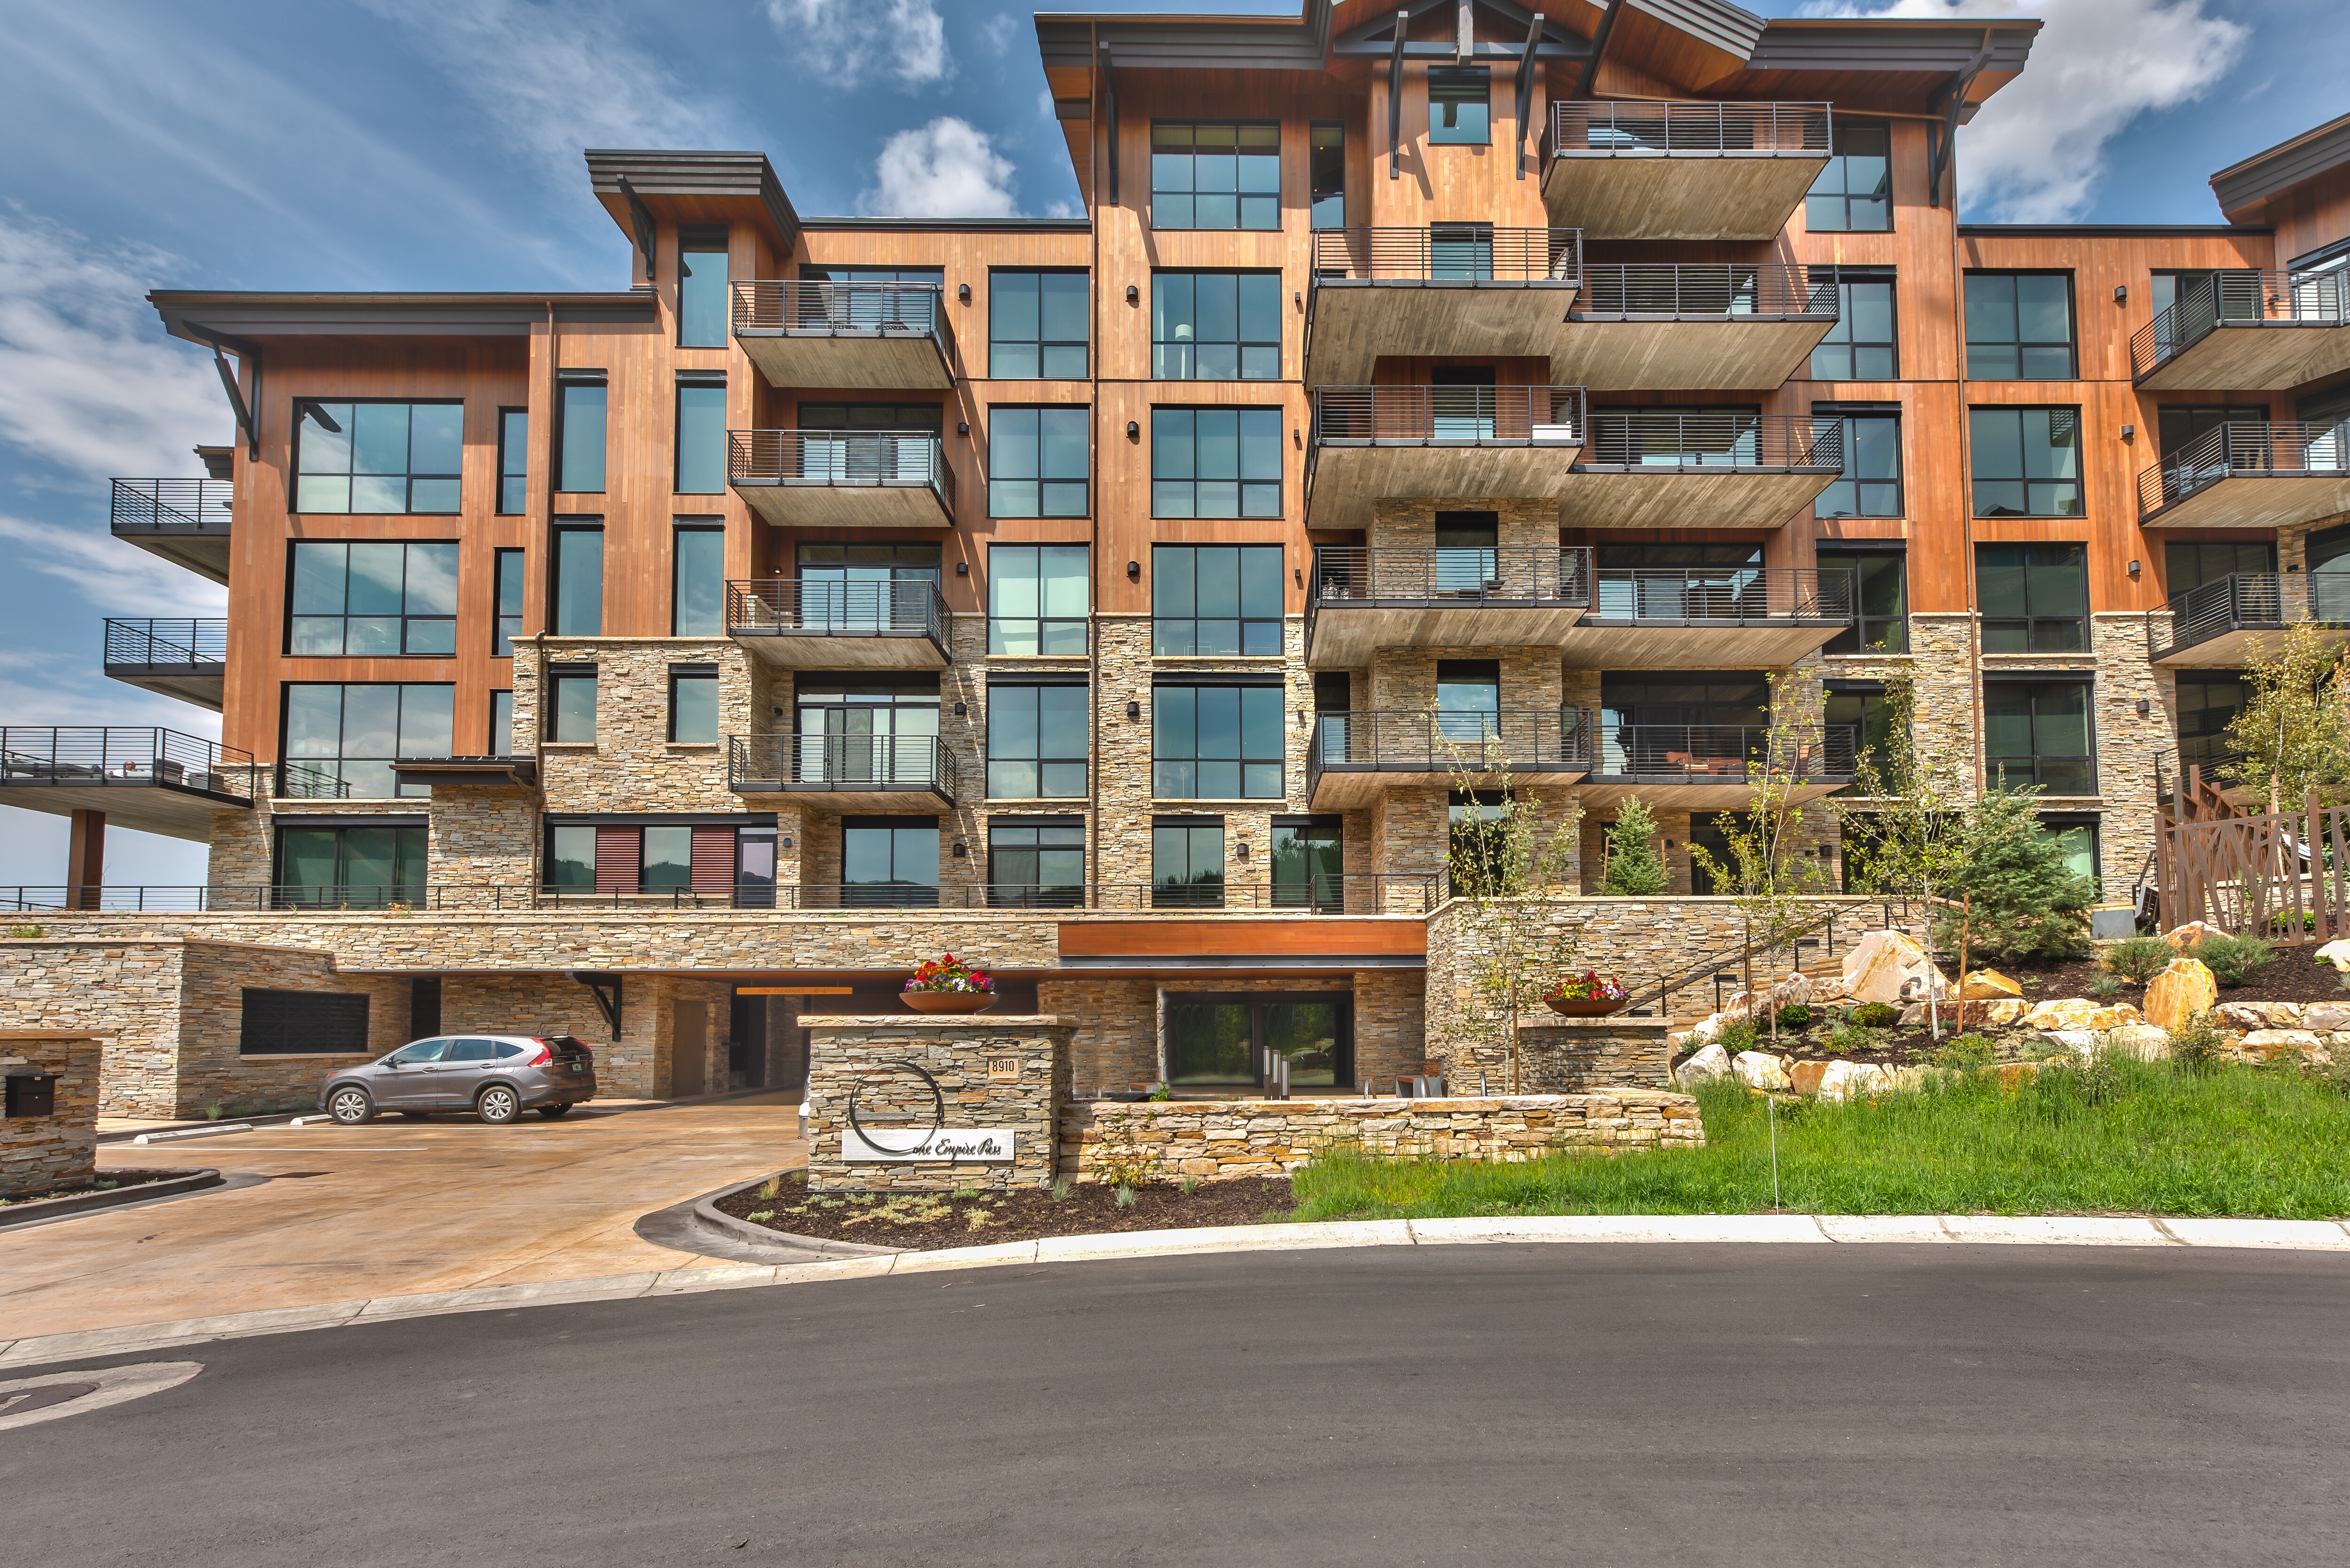 Deer Valley One Empire Pass - 3 Bedroom Condo - Ski-in/Ski-Out